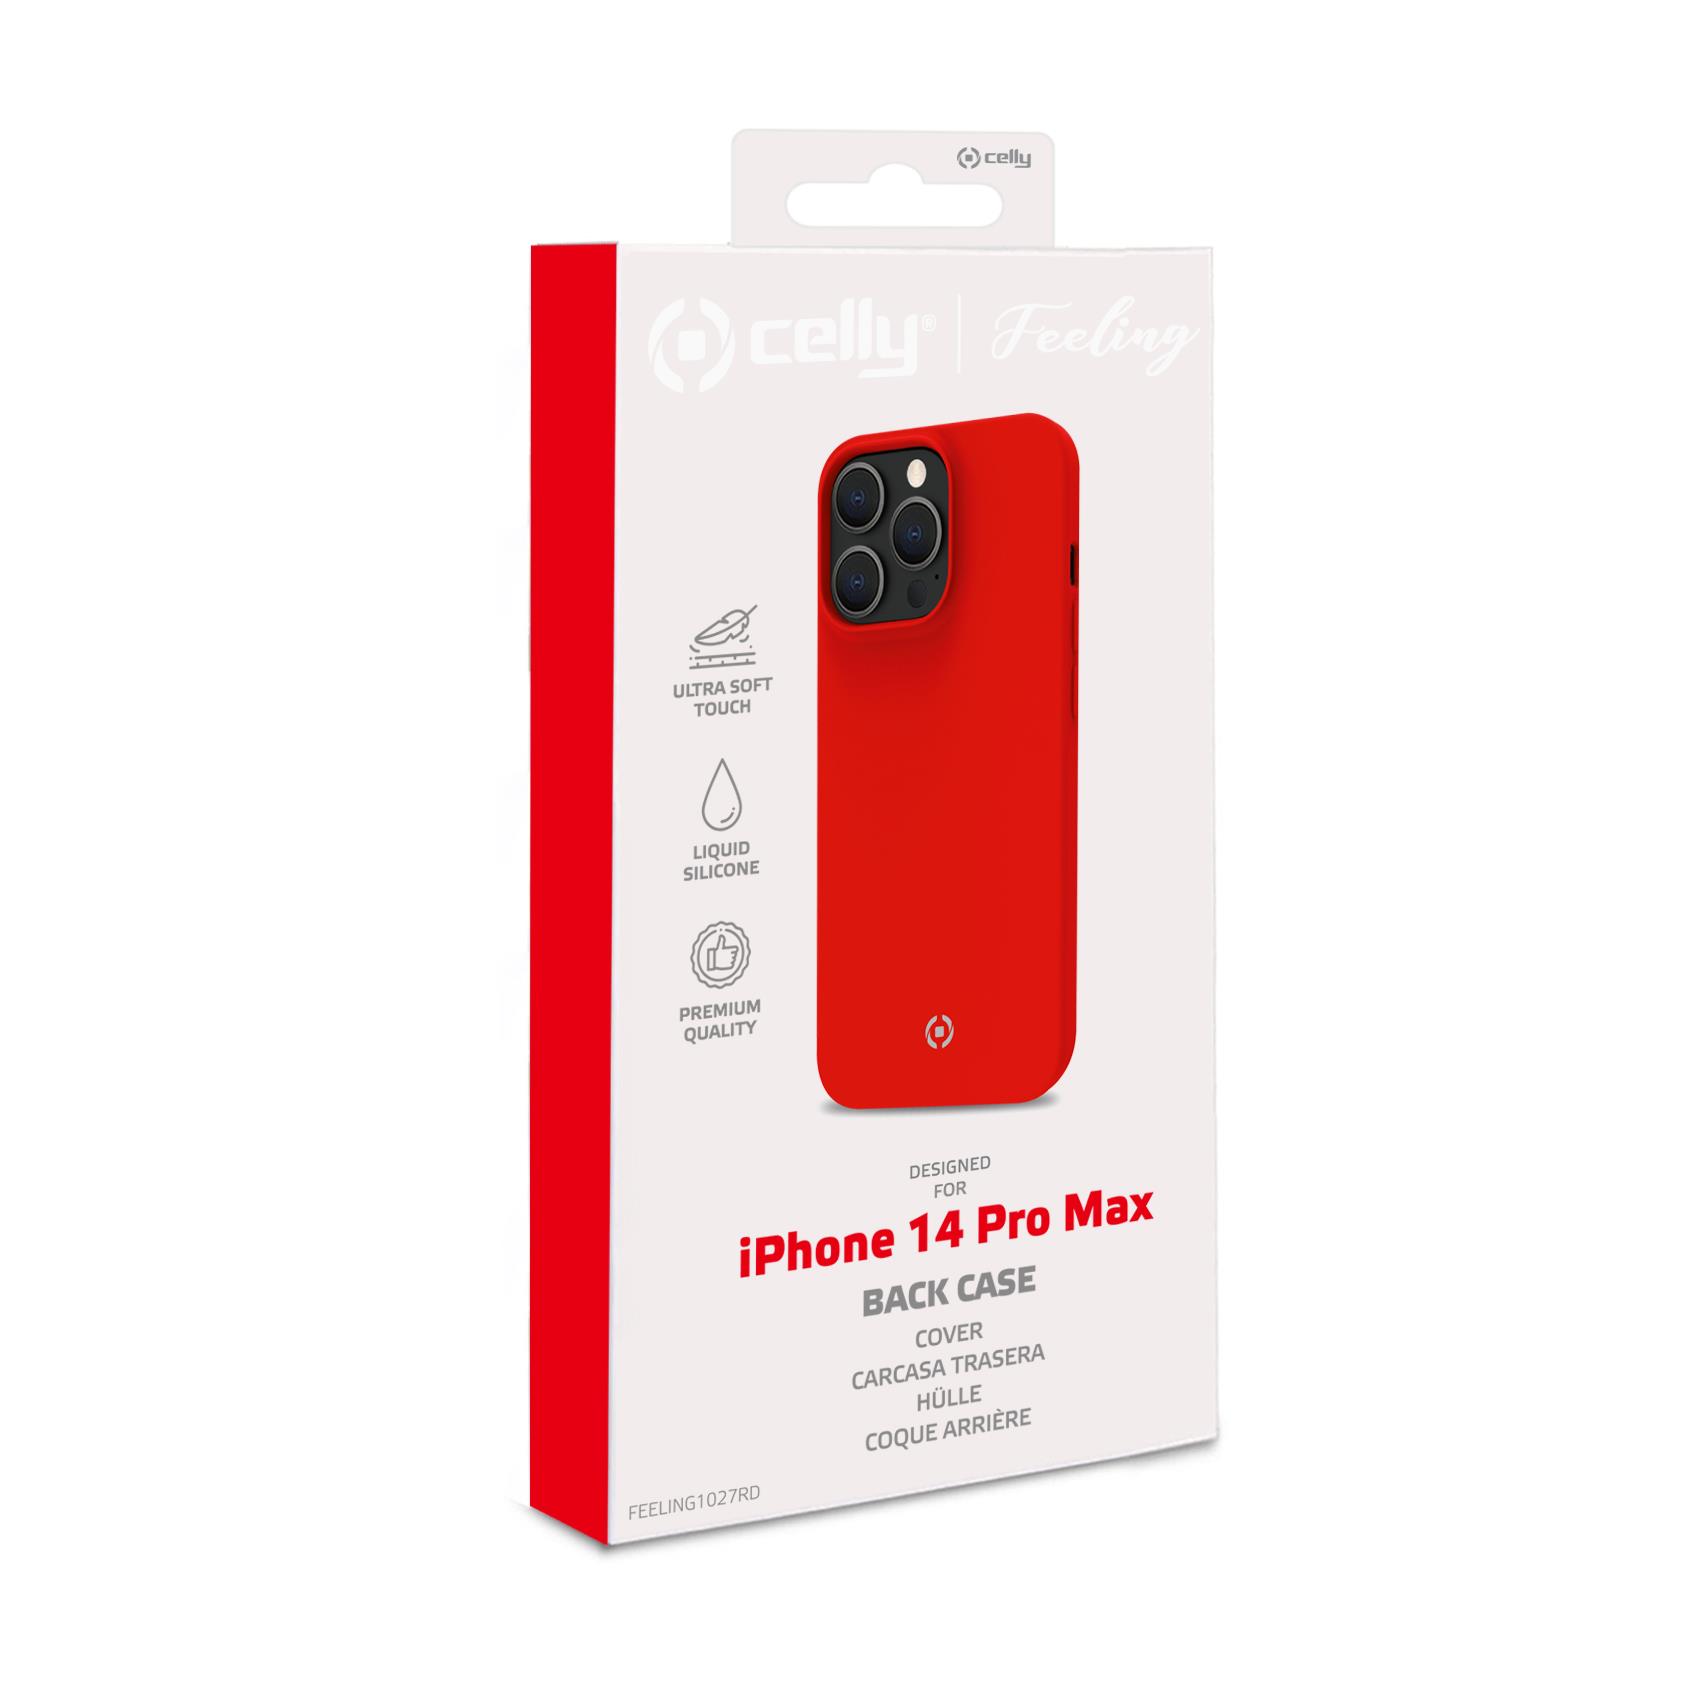 Feeling Iphone 14 Pro Max Red Celly Feeling1027rd 8021735197461